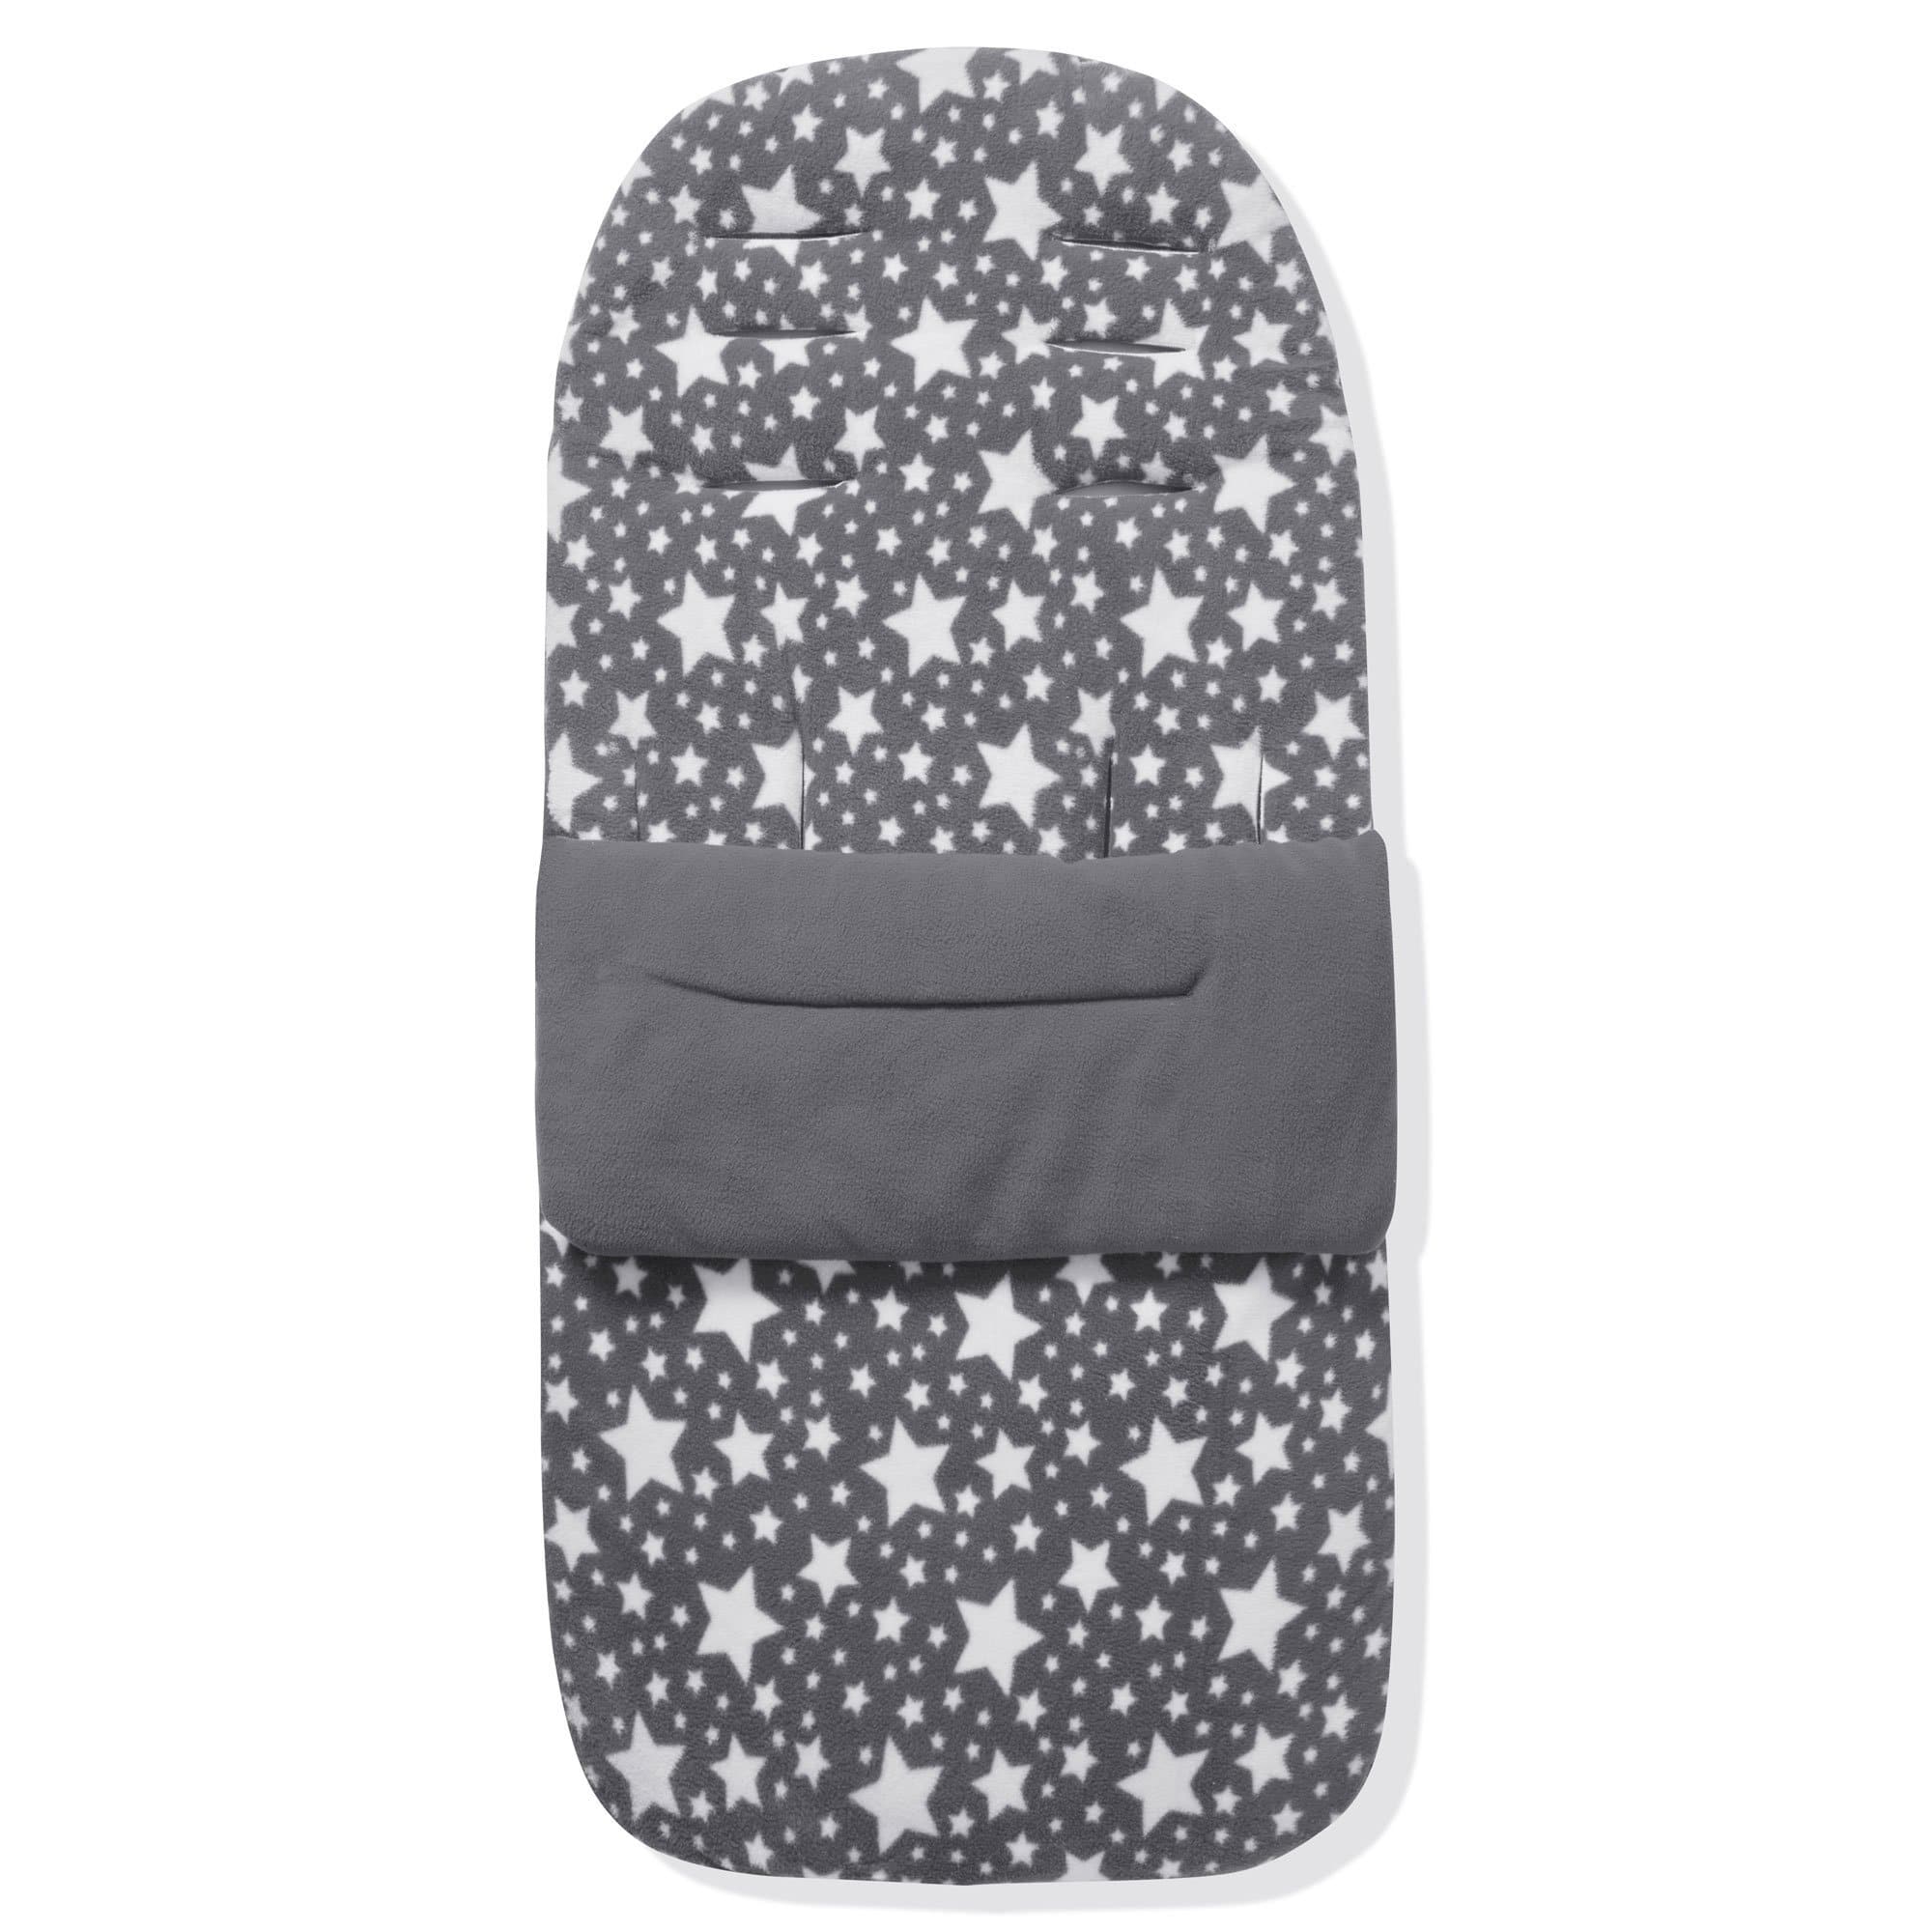 Fleece Footmuff / Cosy Toes Compatible with Quax - Grey Star / Fits All Models | For Your Little One